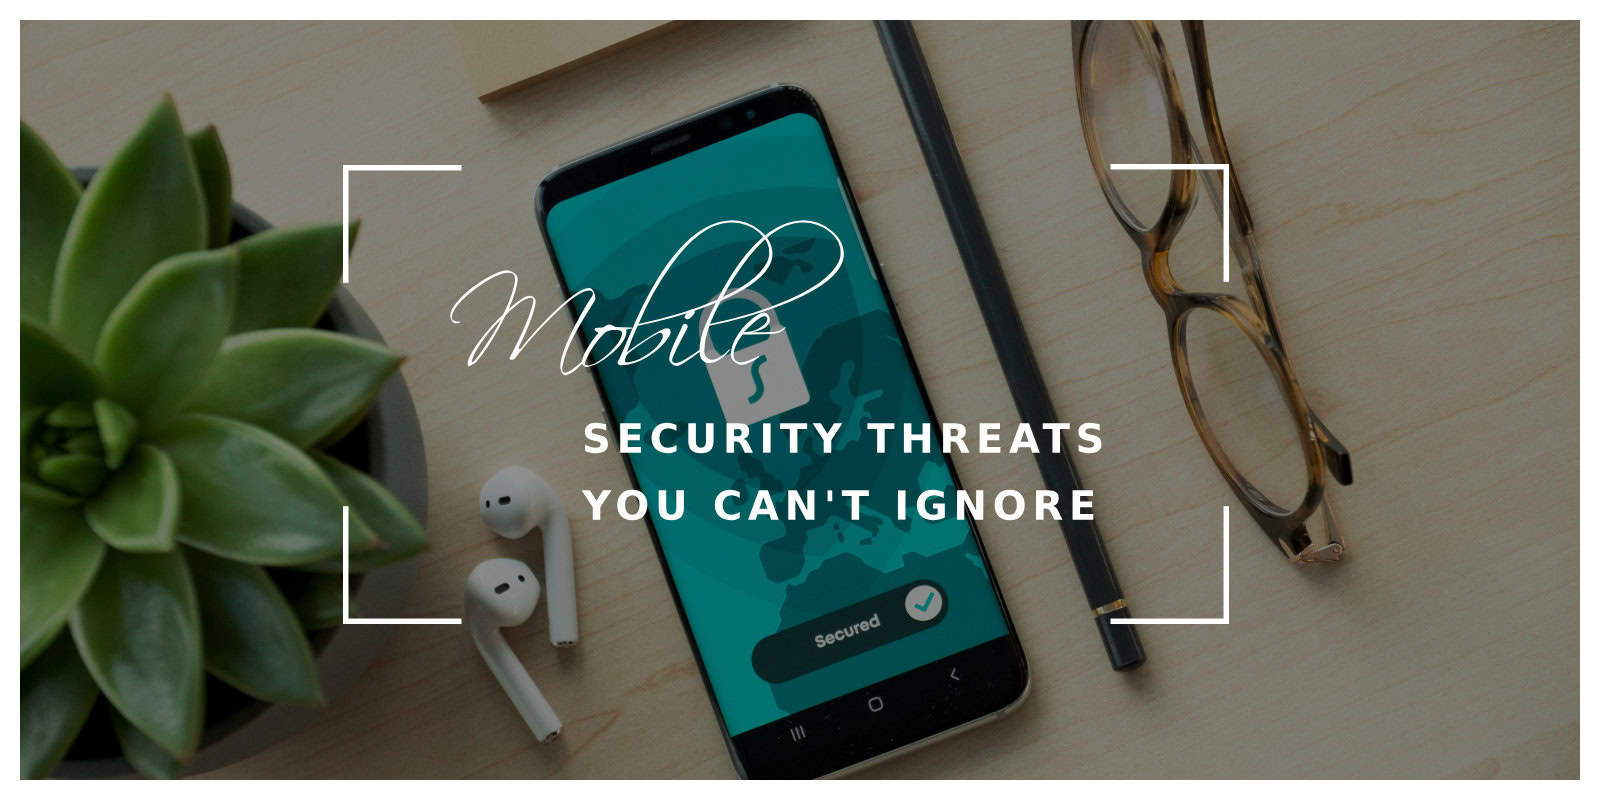 Mobile Security Threats You Can't Ignore